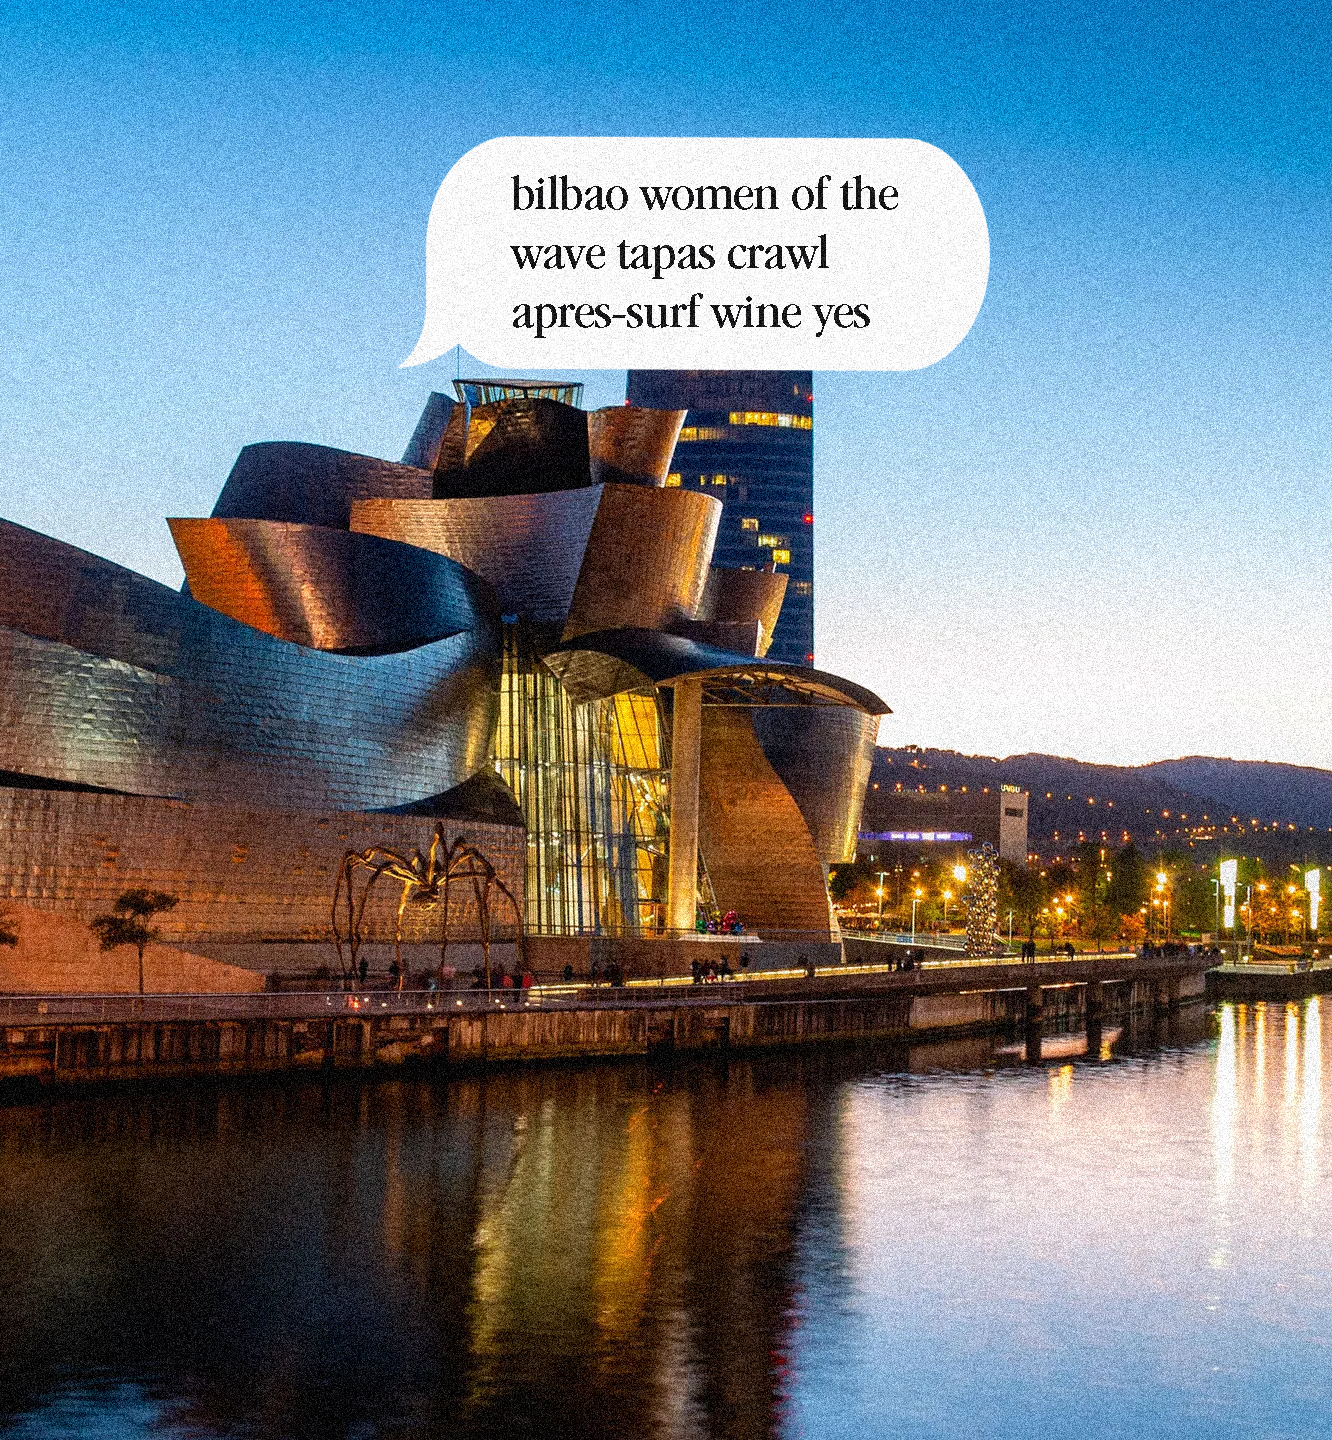 photo of bilba with the text: bilbao women of the wave tapas crawl apres-surf wine yes